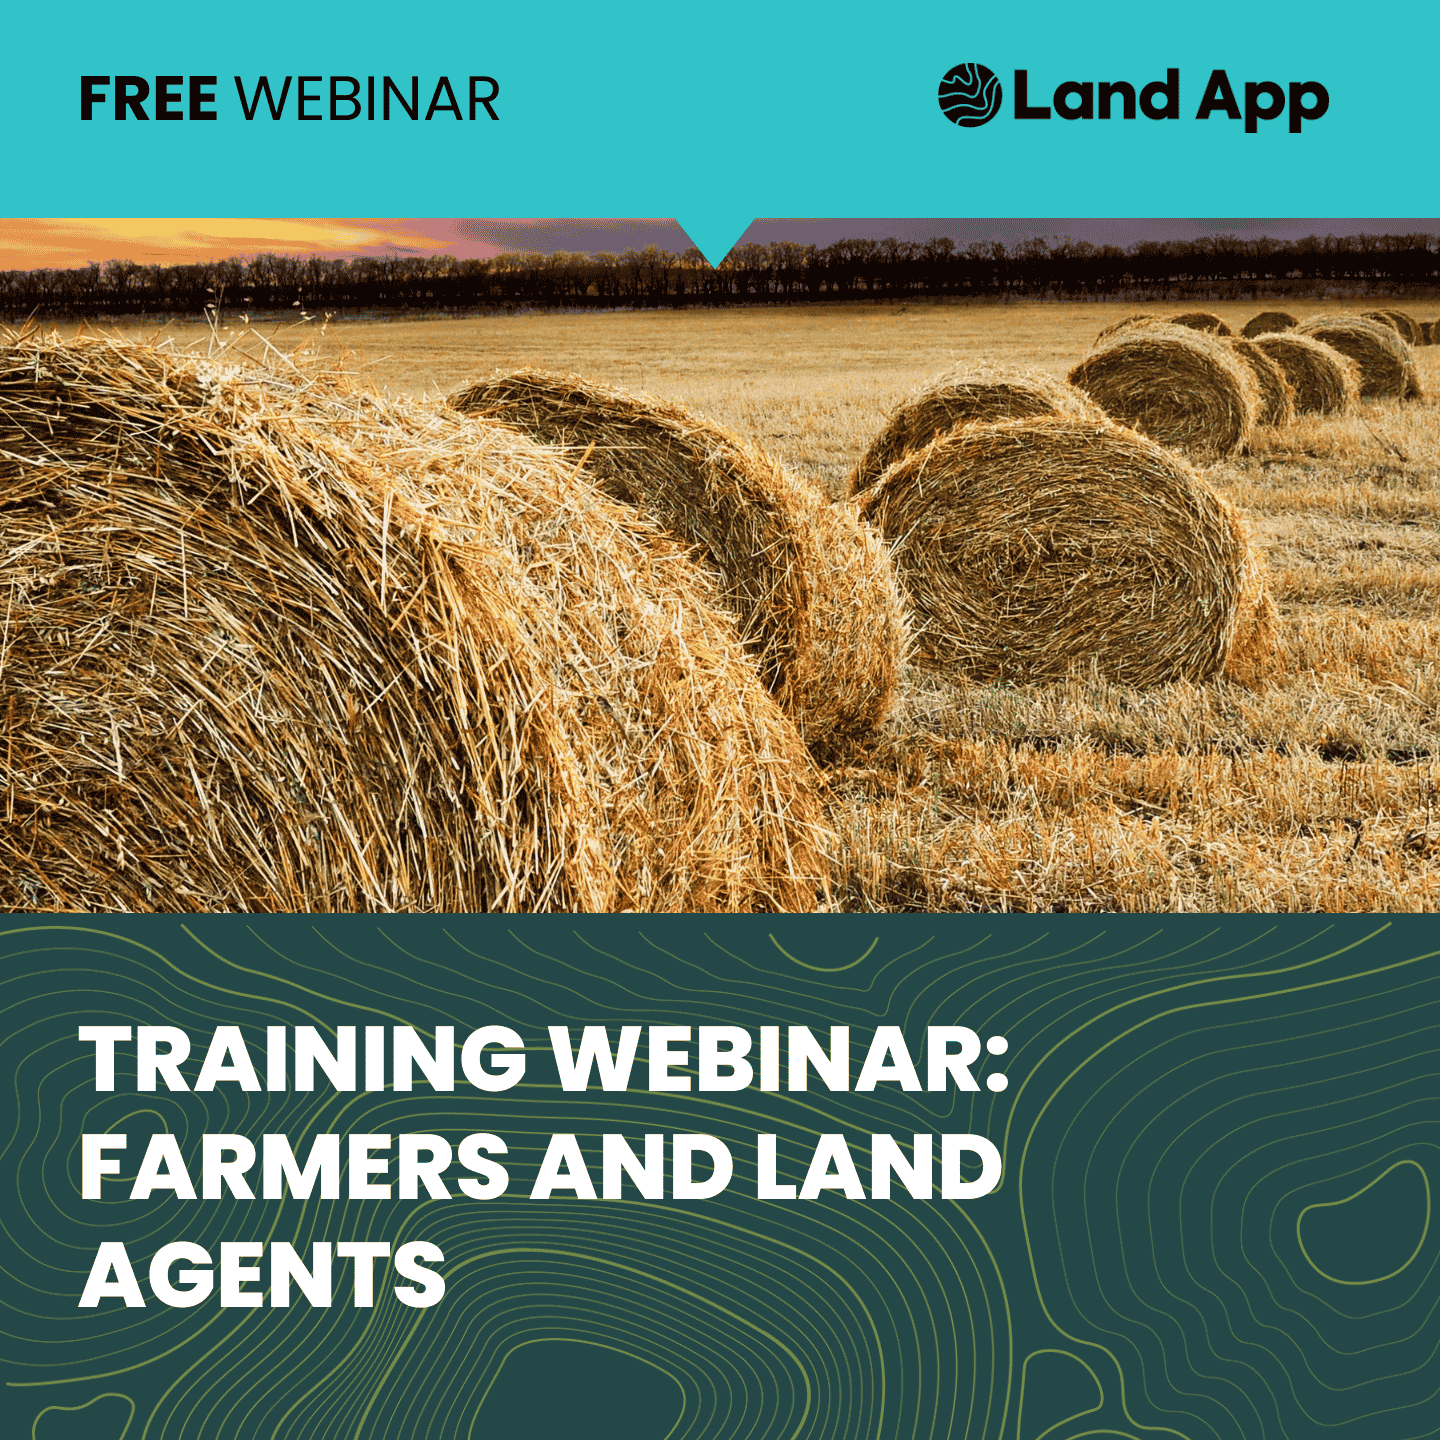 Training Webinar: Farmers and Land Agents 1 pm on the 9th October 2022